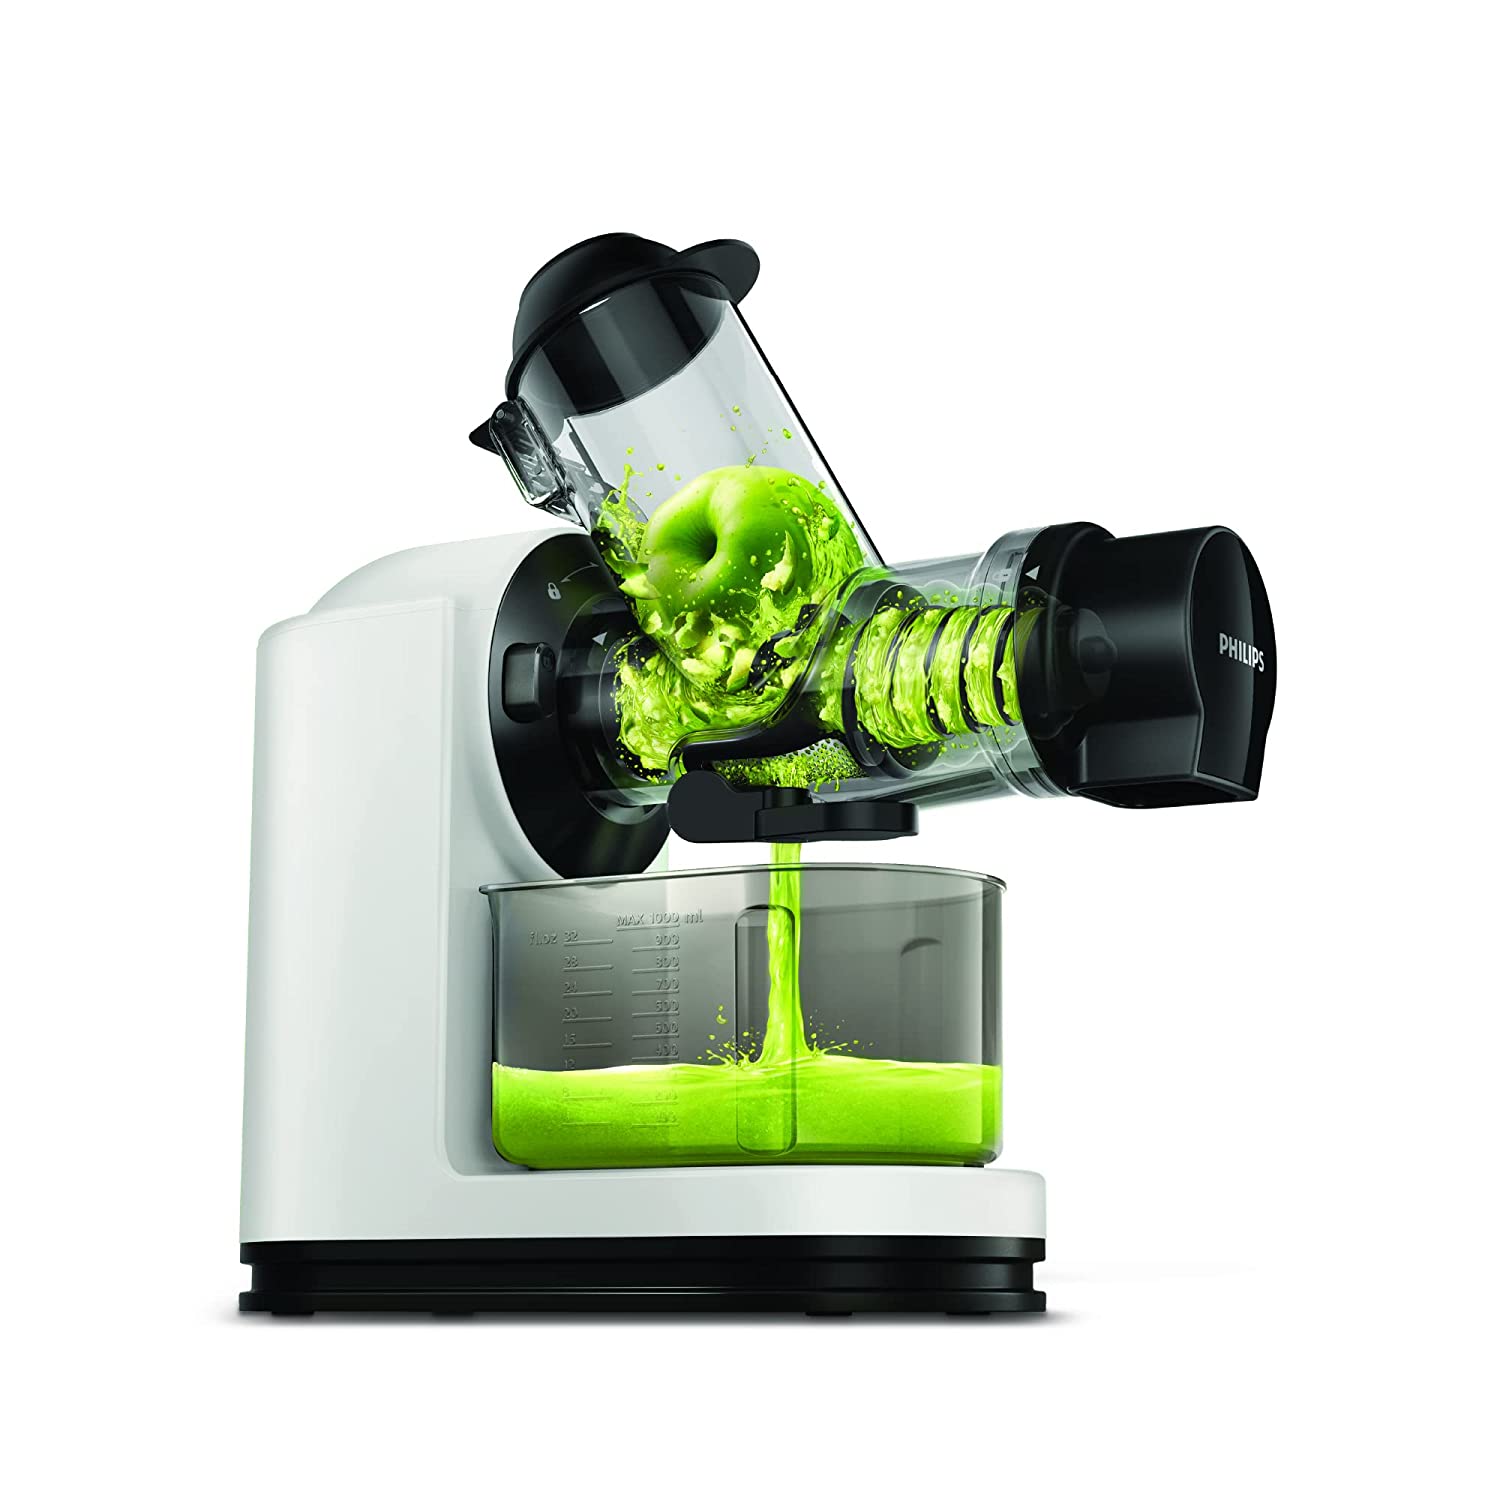 Philips Masticating slow Juicer Review